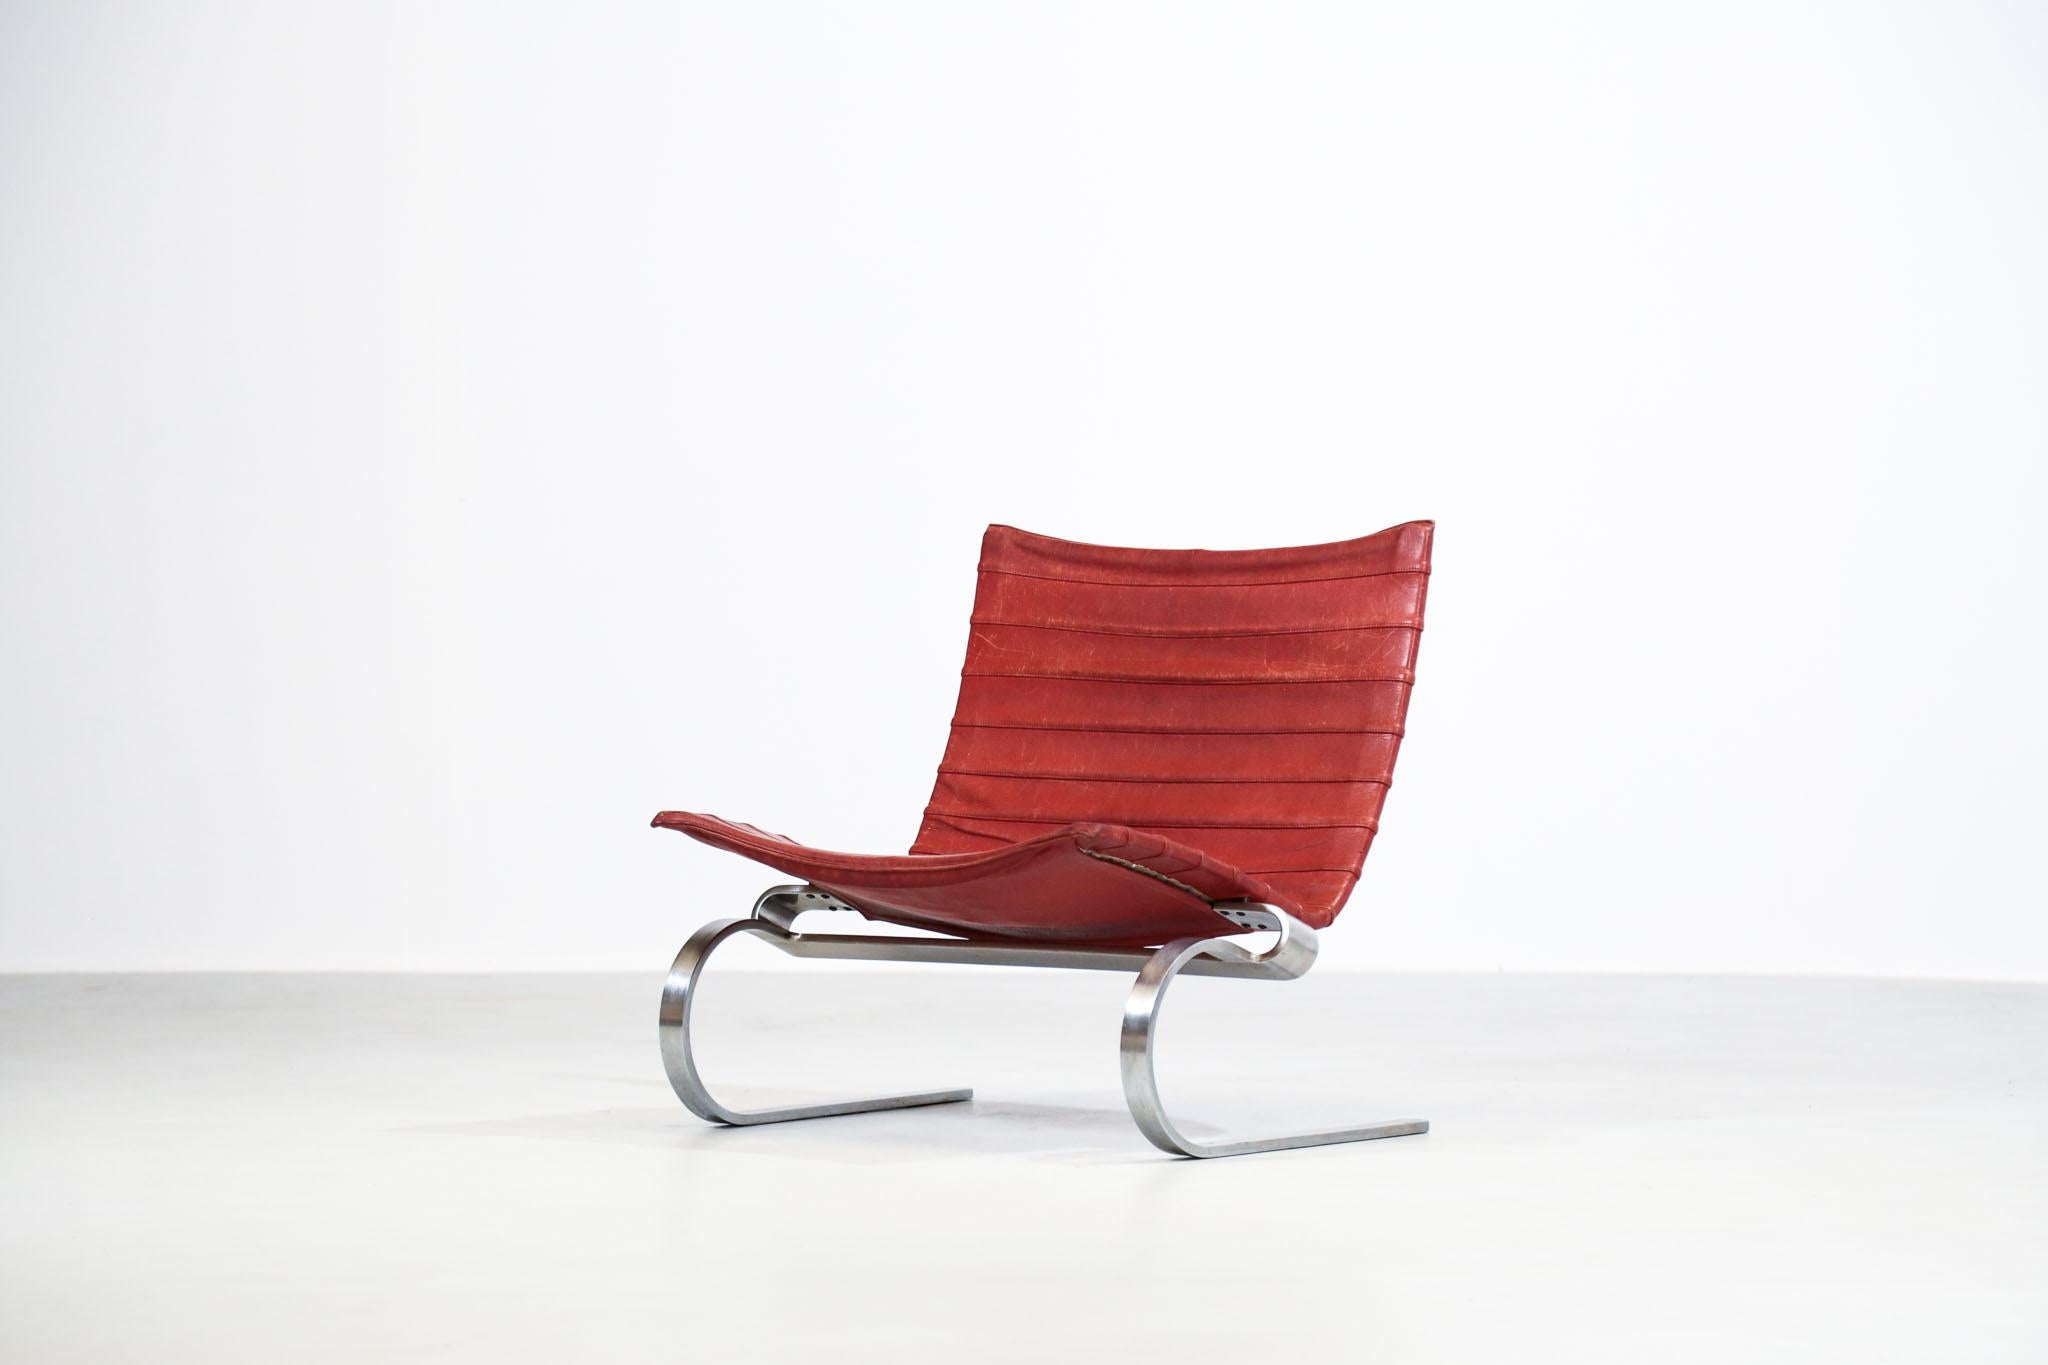 Rare early edition Danish lounge chair by Poul Kjaerholm for E. Kold Christensen.
Steel structure with leather seat.
Signed under the seat.
Model low back chair, very rare. 

 